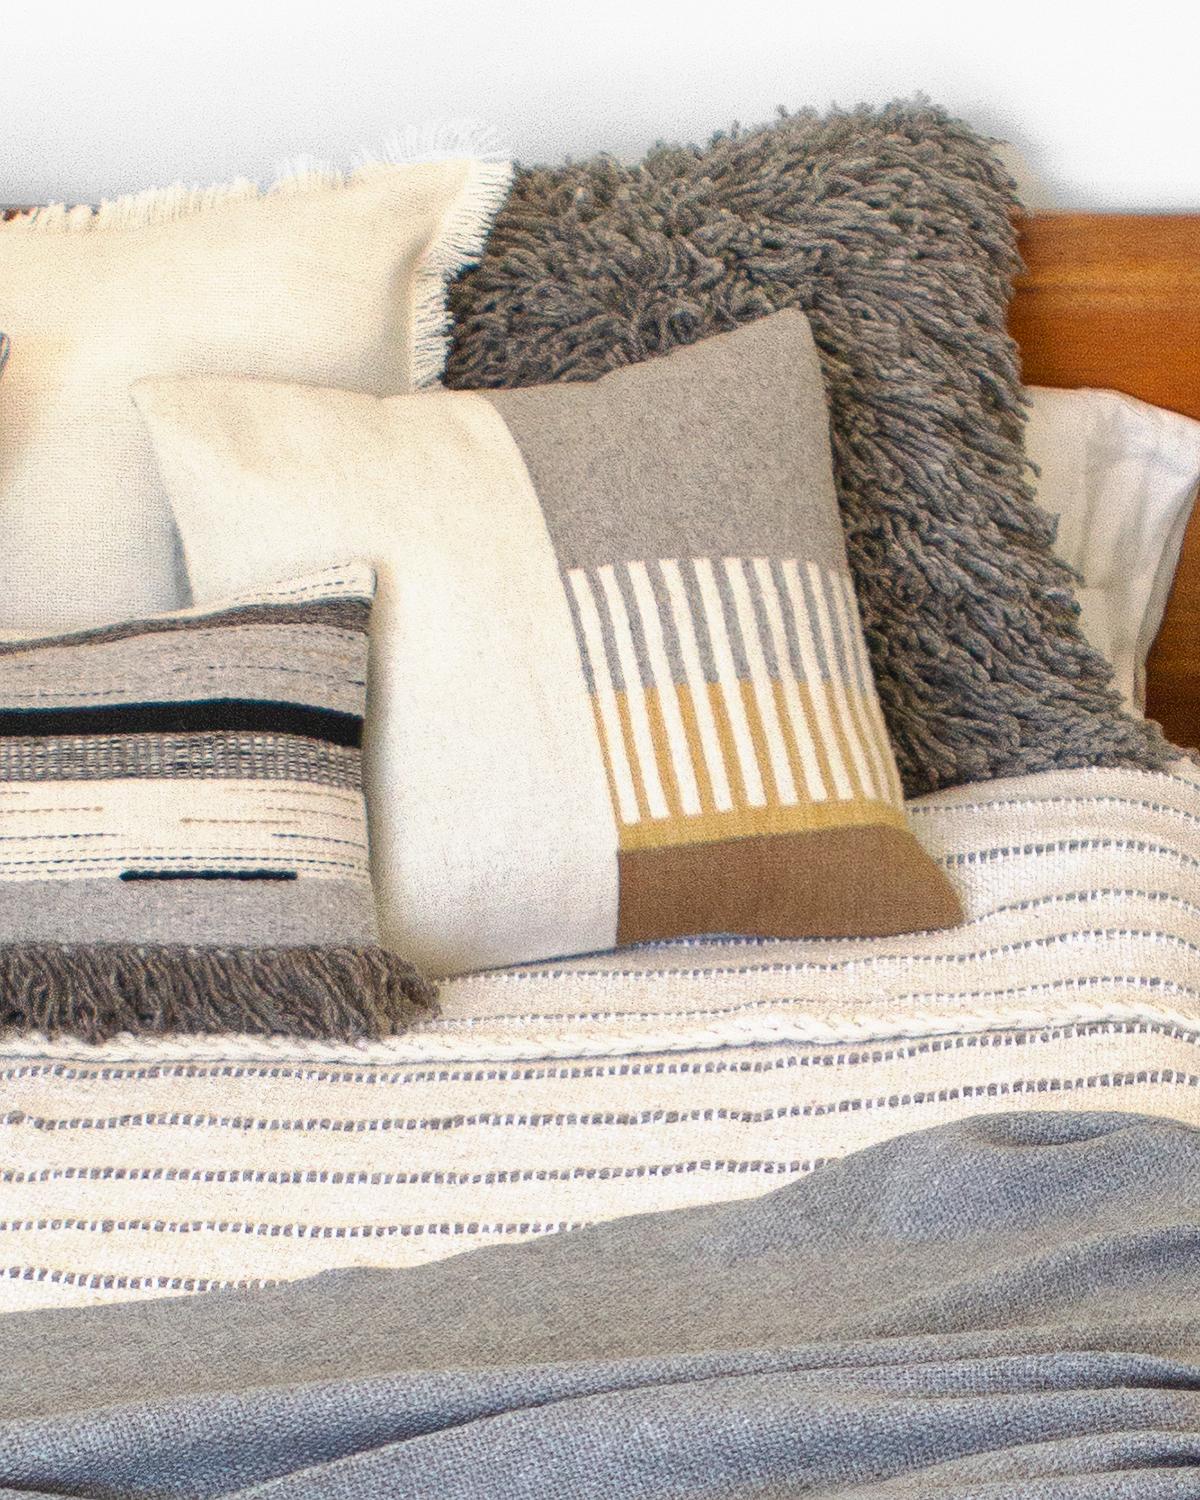 Organic Modern Awanay Handwoven Sur Shaggy Wool Throw Pillow in Gray, in Stock For Sale